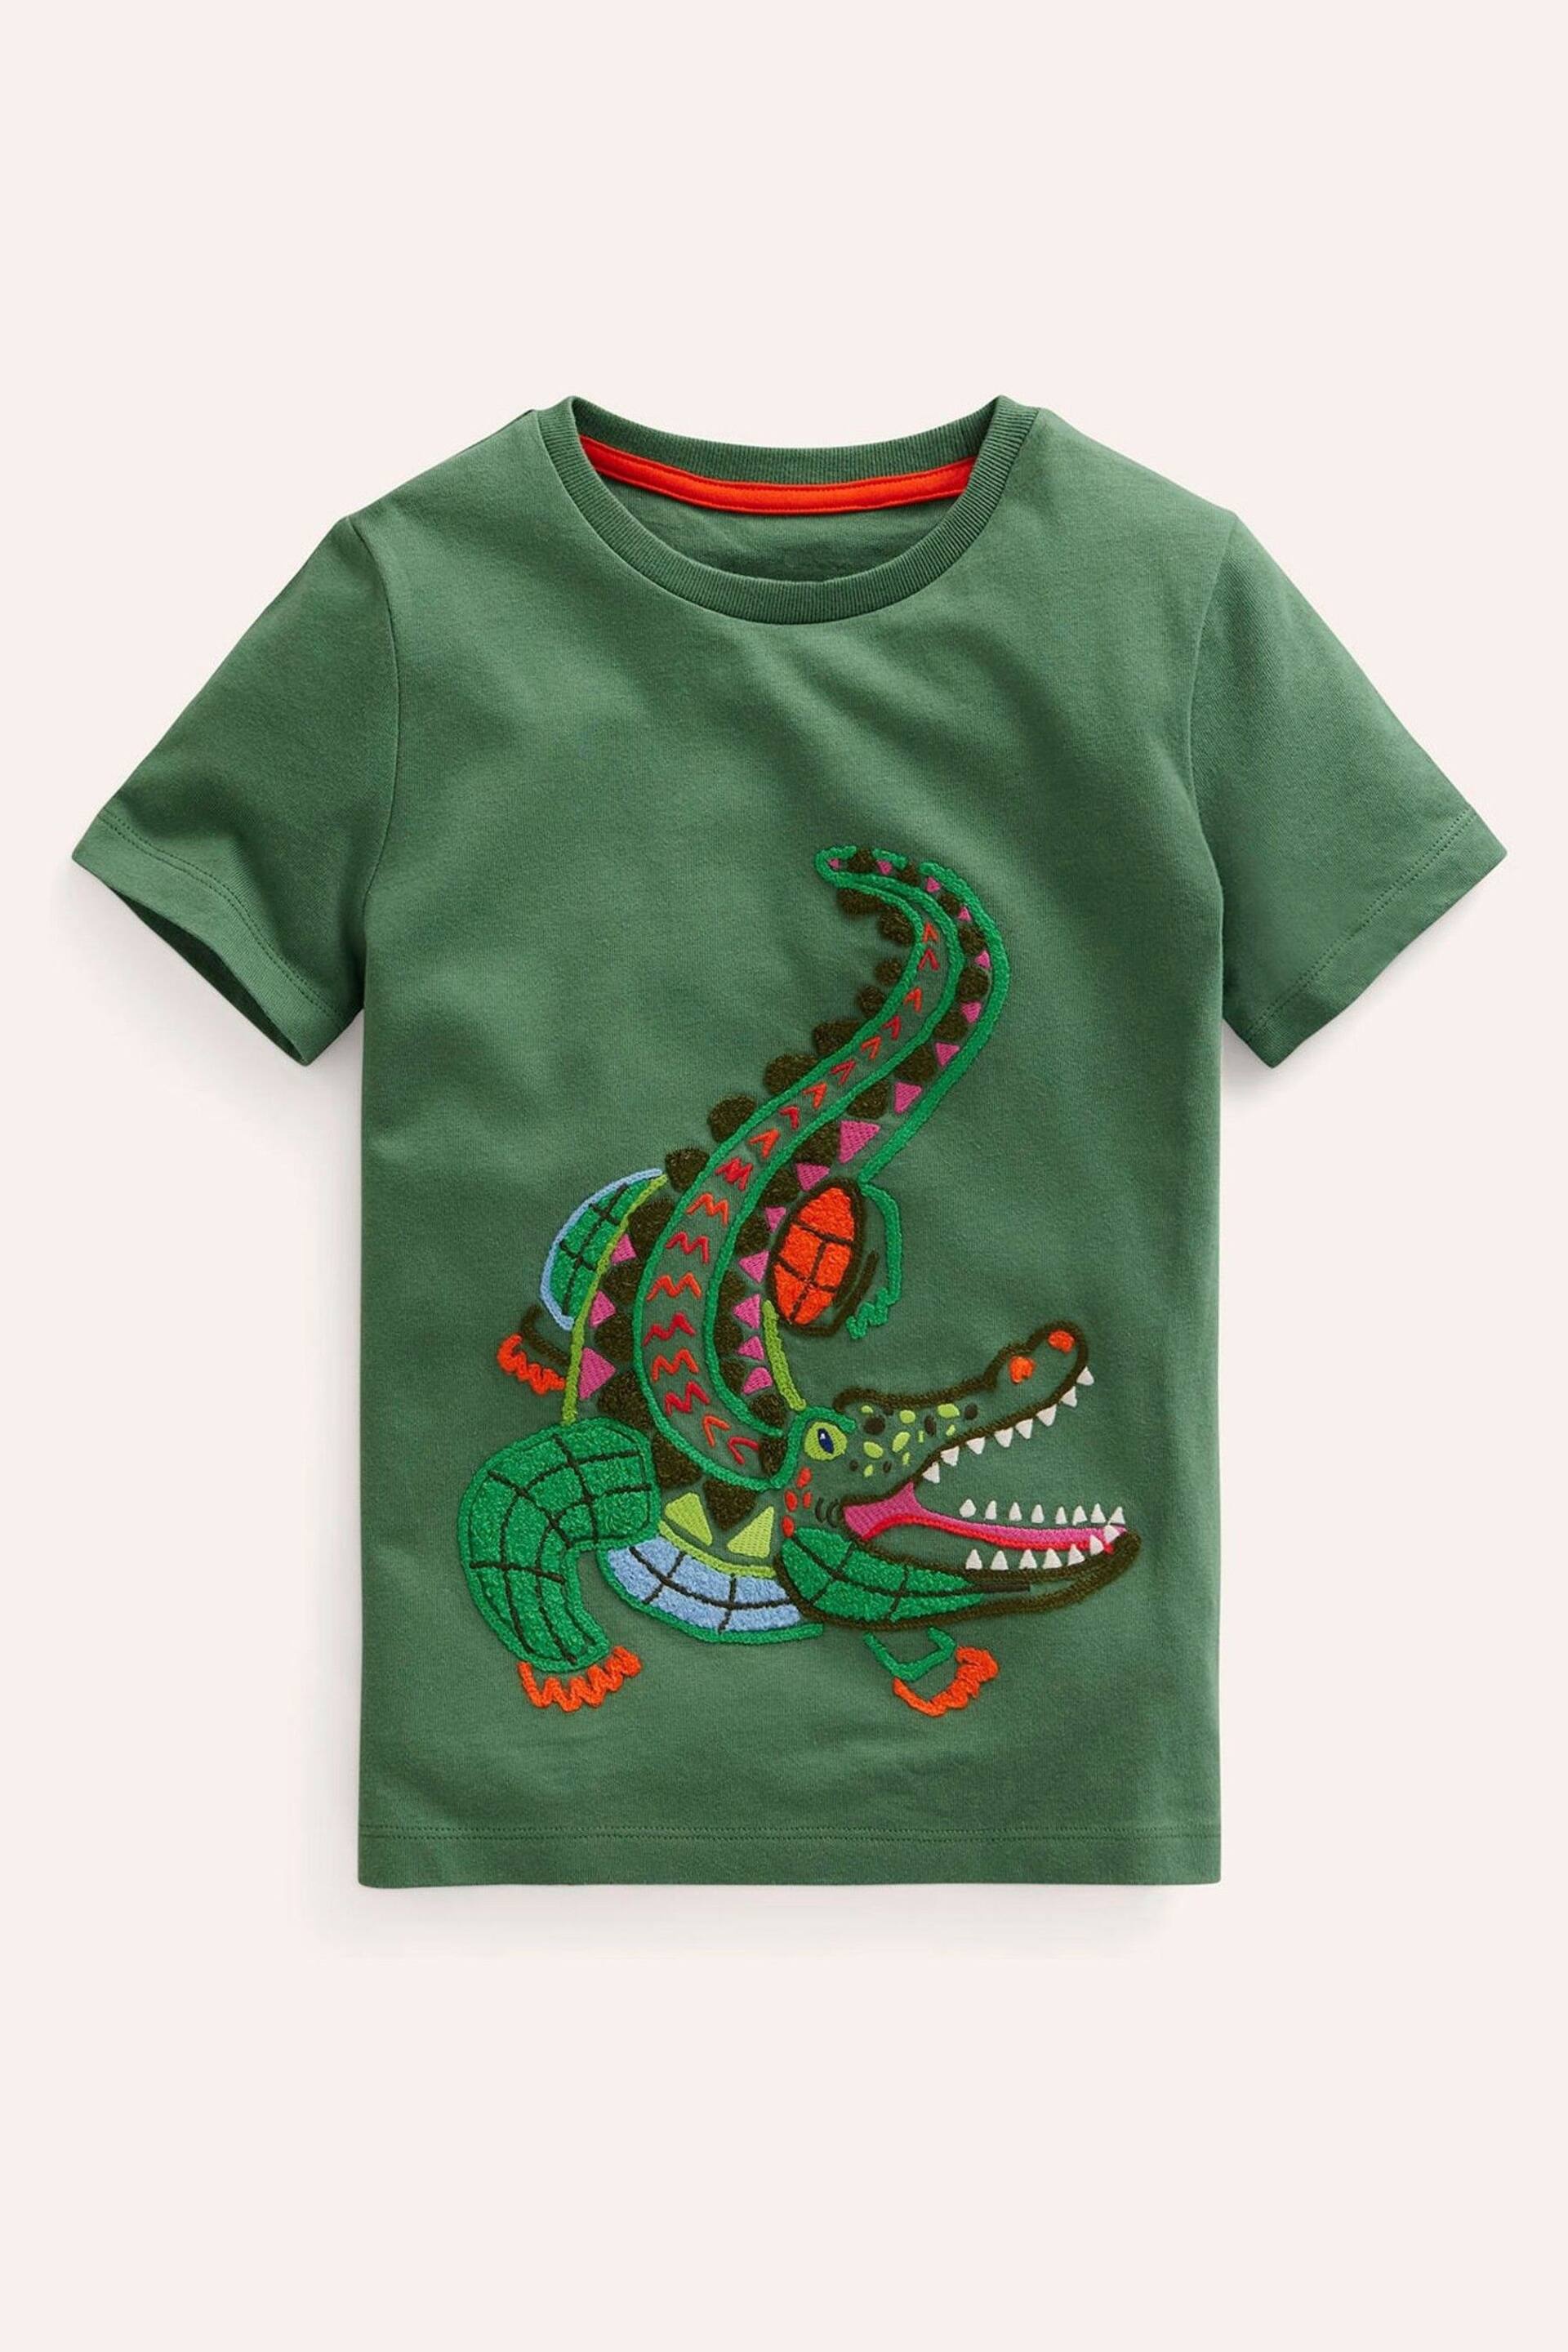 Boden Green Chainstitch Animal Print T-Shirt - Image 1 of 3